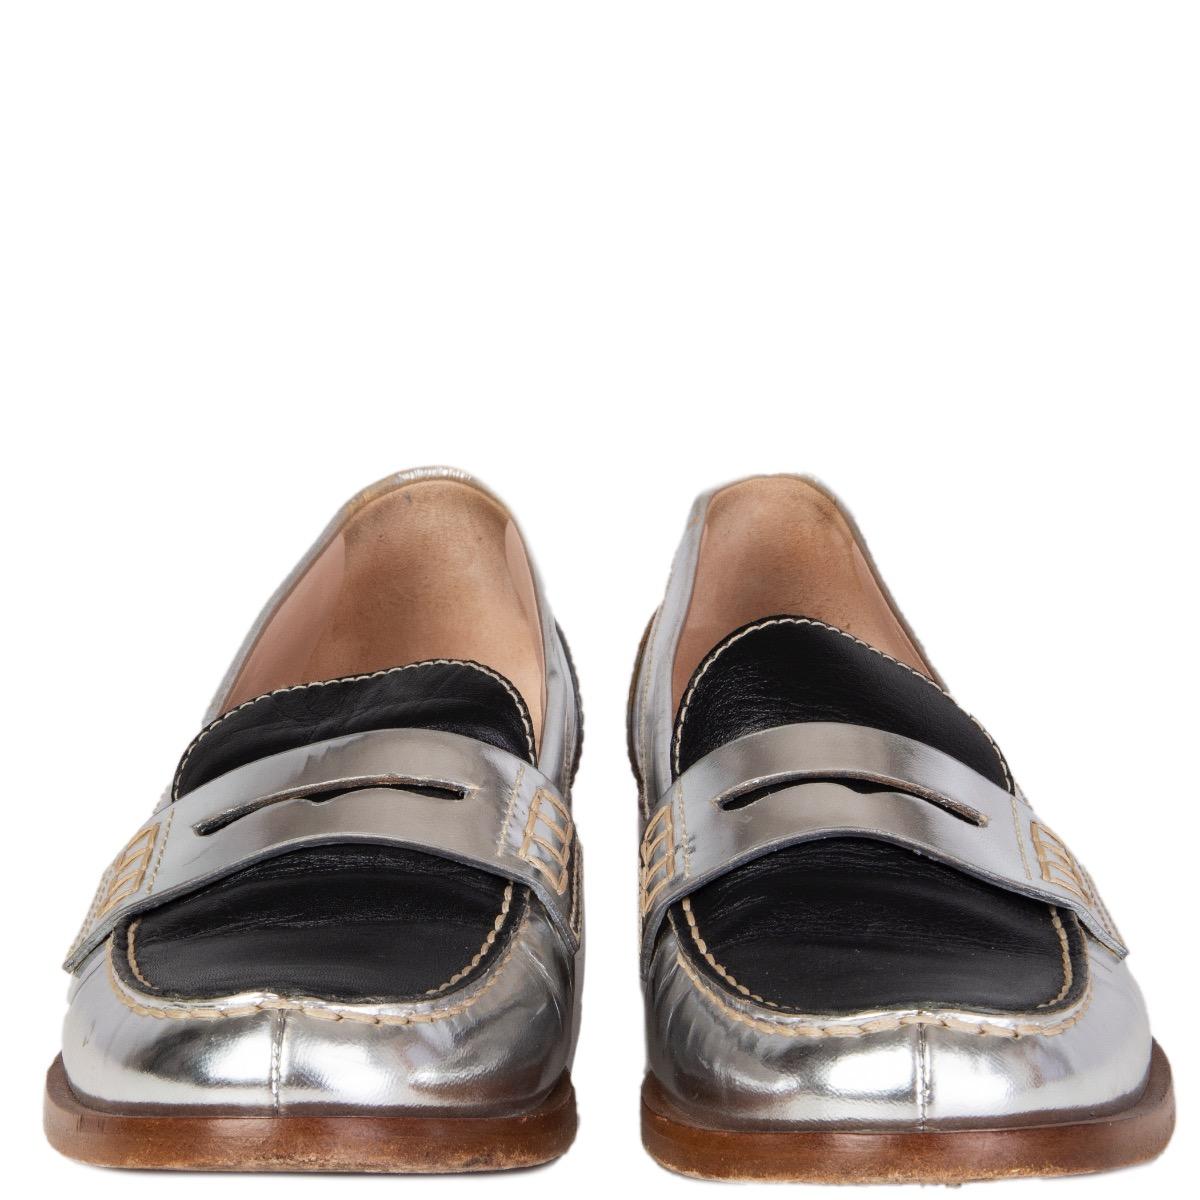 100% authentic Miu Miu penny loafers in black and metallic silver calfskin. Have been worn and are in excellent condition.

Measurements
Imprinted Size	37.5
Shoe Size	37.5
Inside Sole	24cm (9.4in)
Width	7.5cm (2.9in)
Heel	2cm (0.8in)

All our